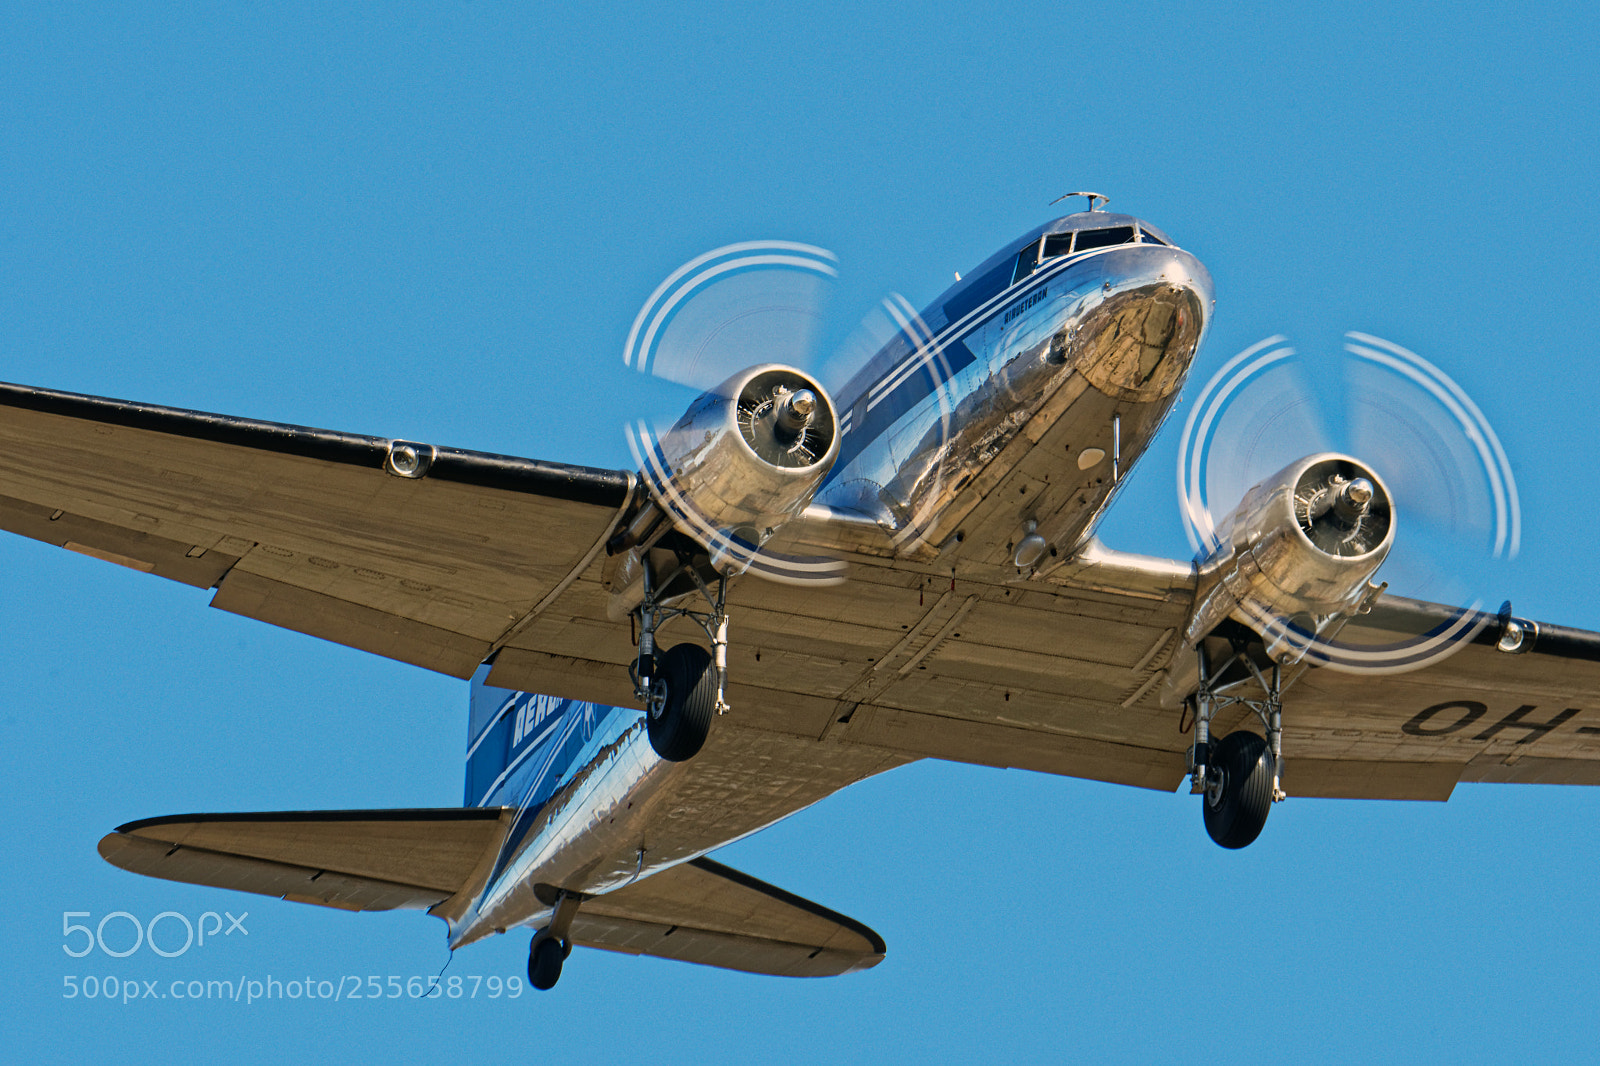 Nikon D500 sample photo. Dc-3 in the midday photography